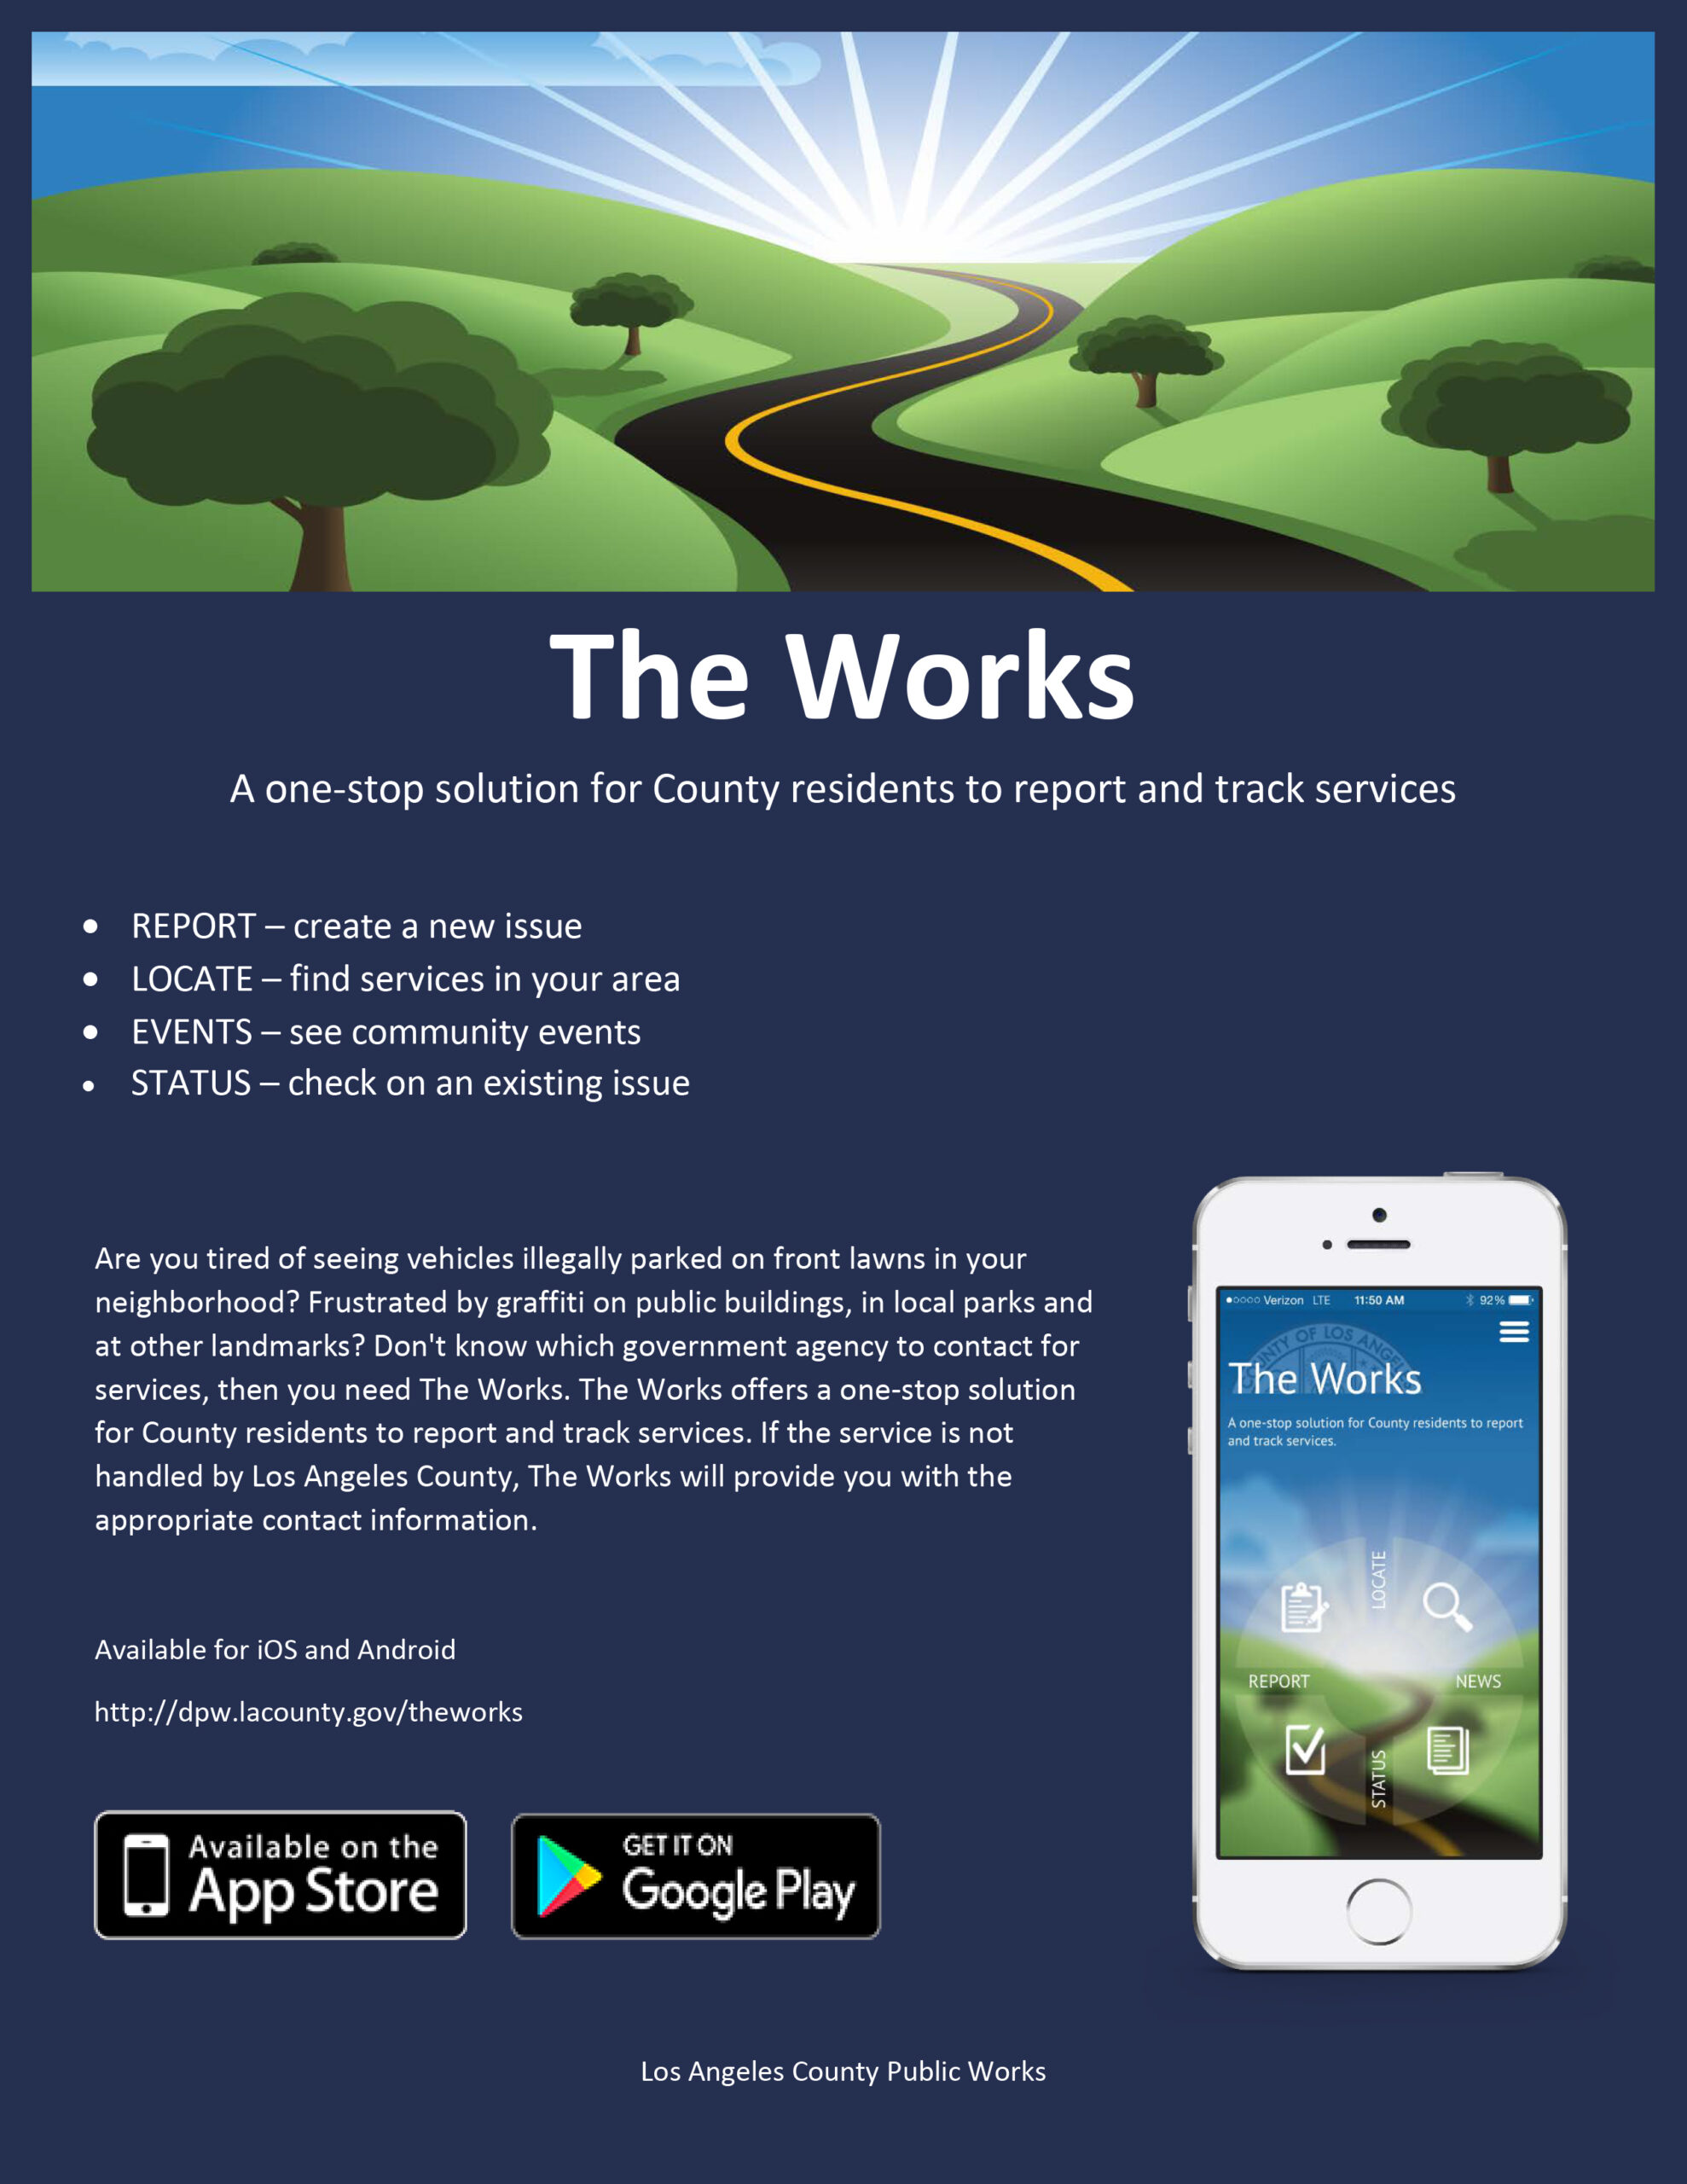 Public Works blue background flyer showing cell phone at the bottom right and a road through the mountains at the top